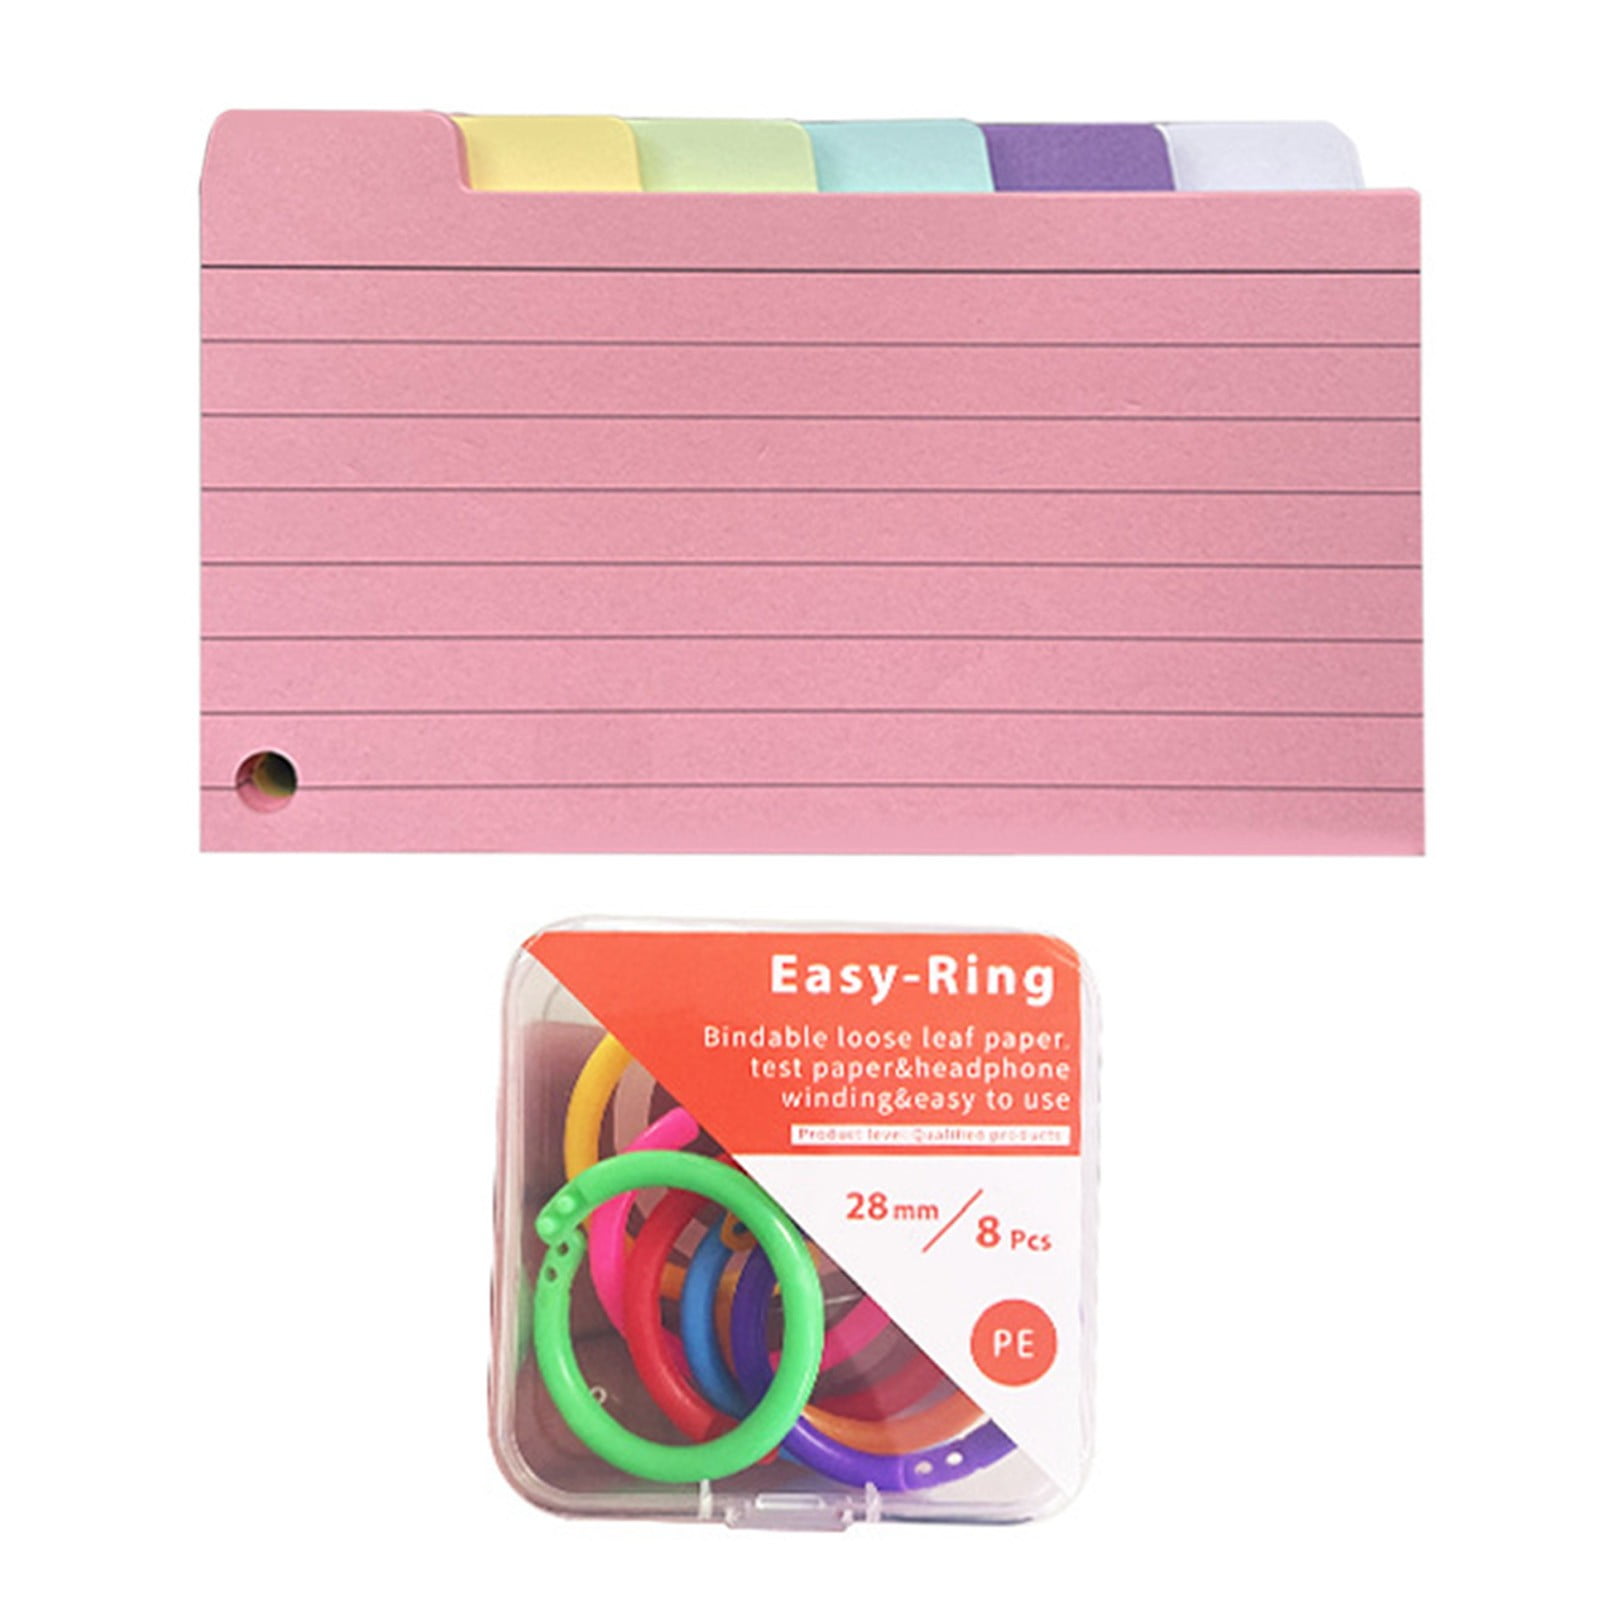 Boring index cards + washi tape = cute for notes and listsTry with  colored note cards. Punch & put on a ring?